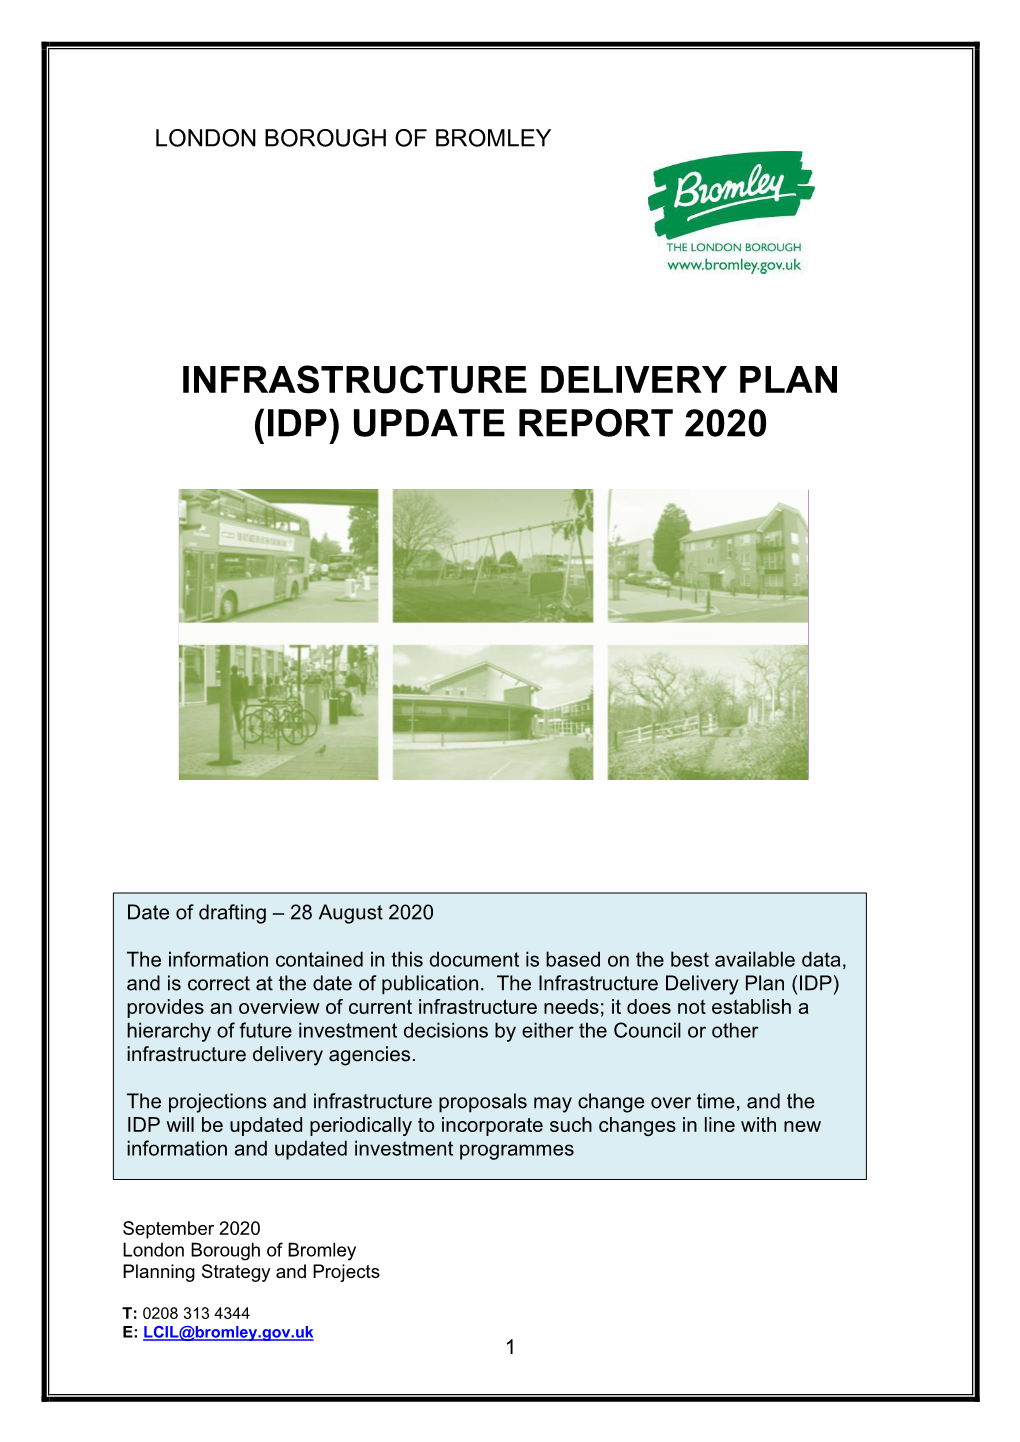 Infrastructure Delivery Plan (Idp) Update Report 2020